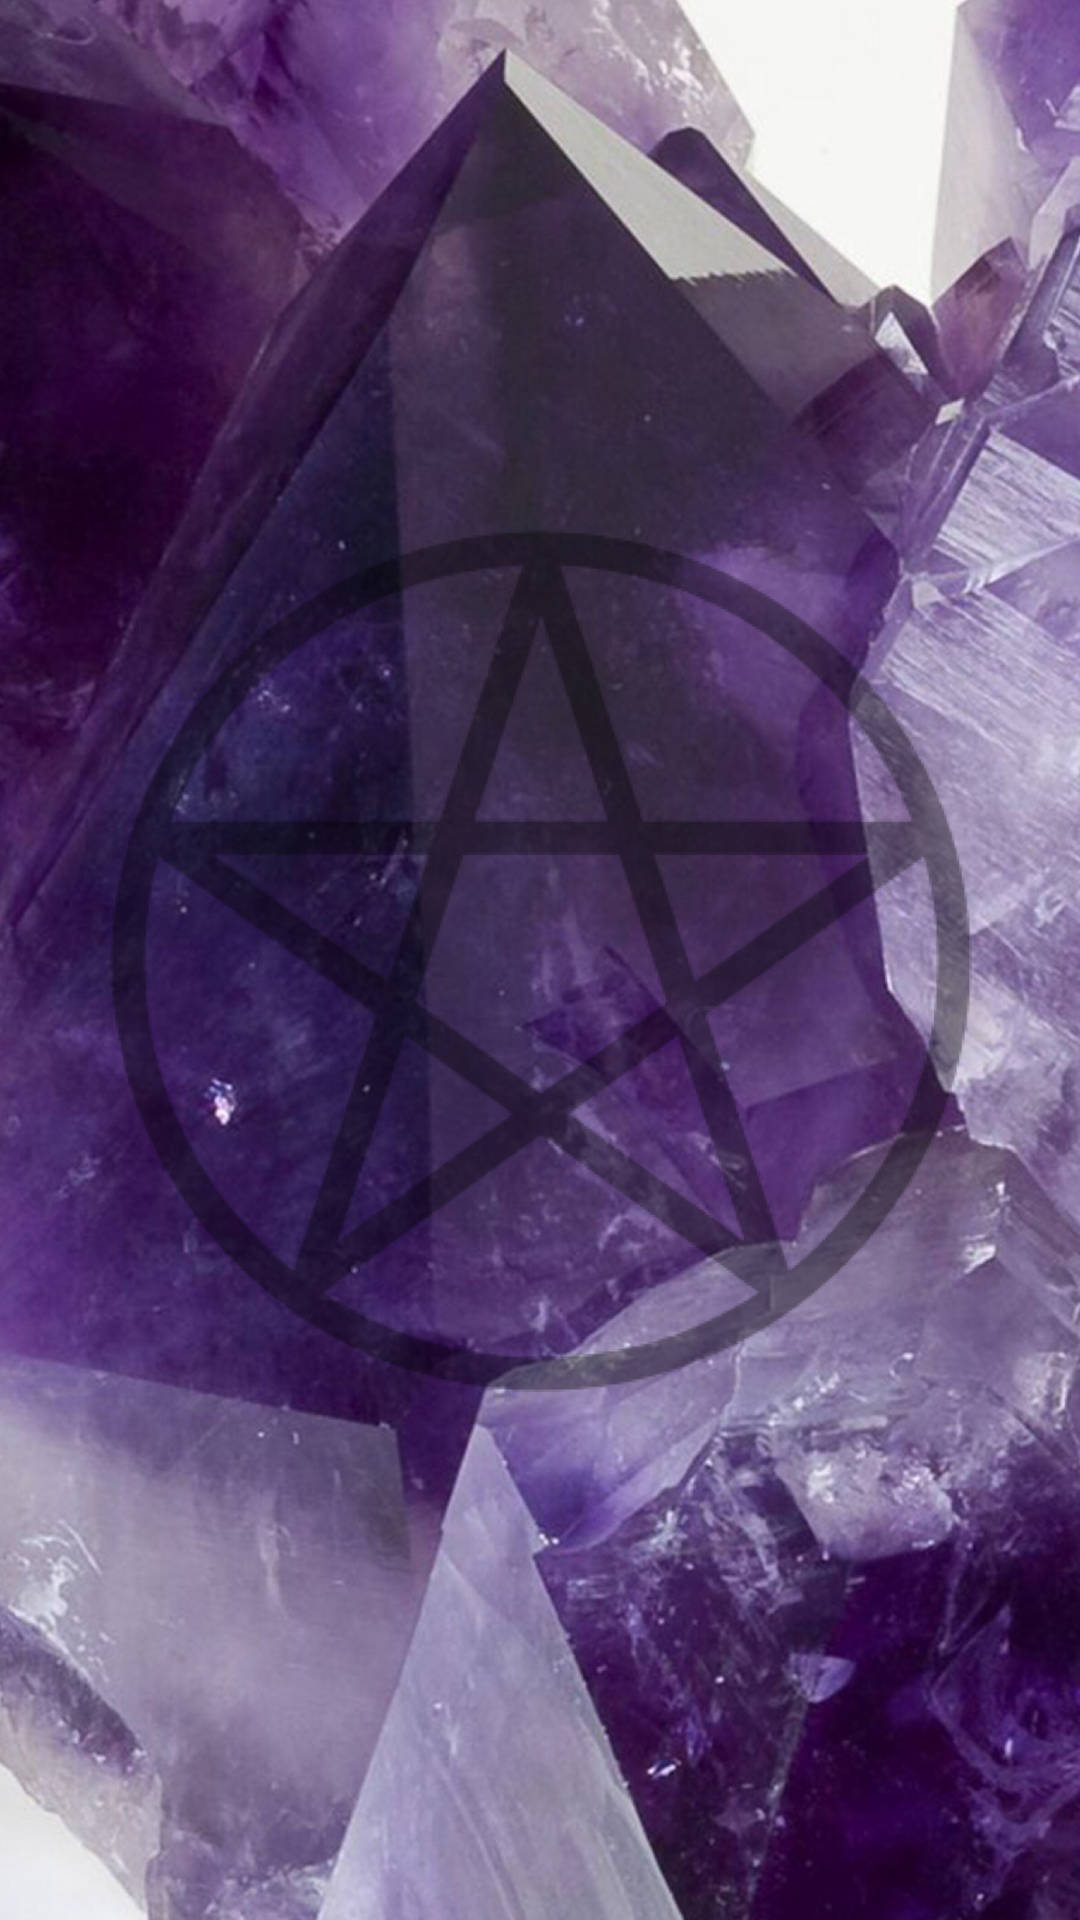 Witchy Aesthetic Crystal Pentacle Wallpaper